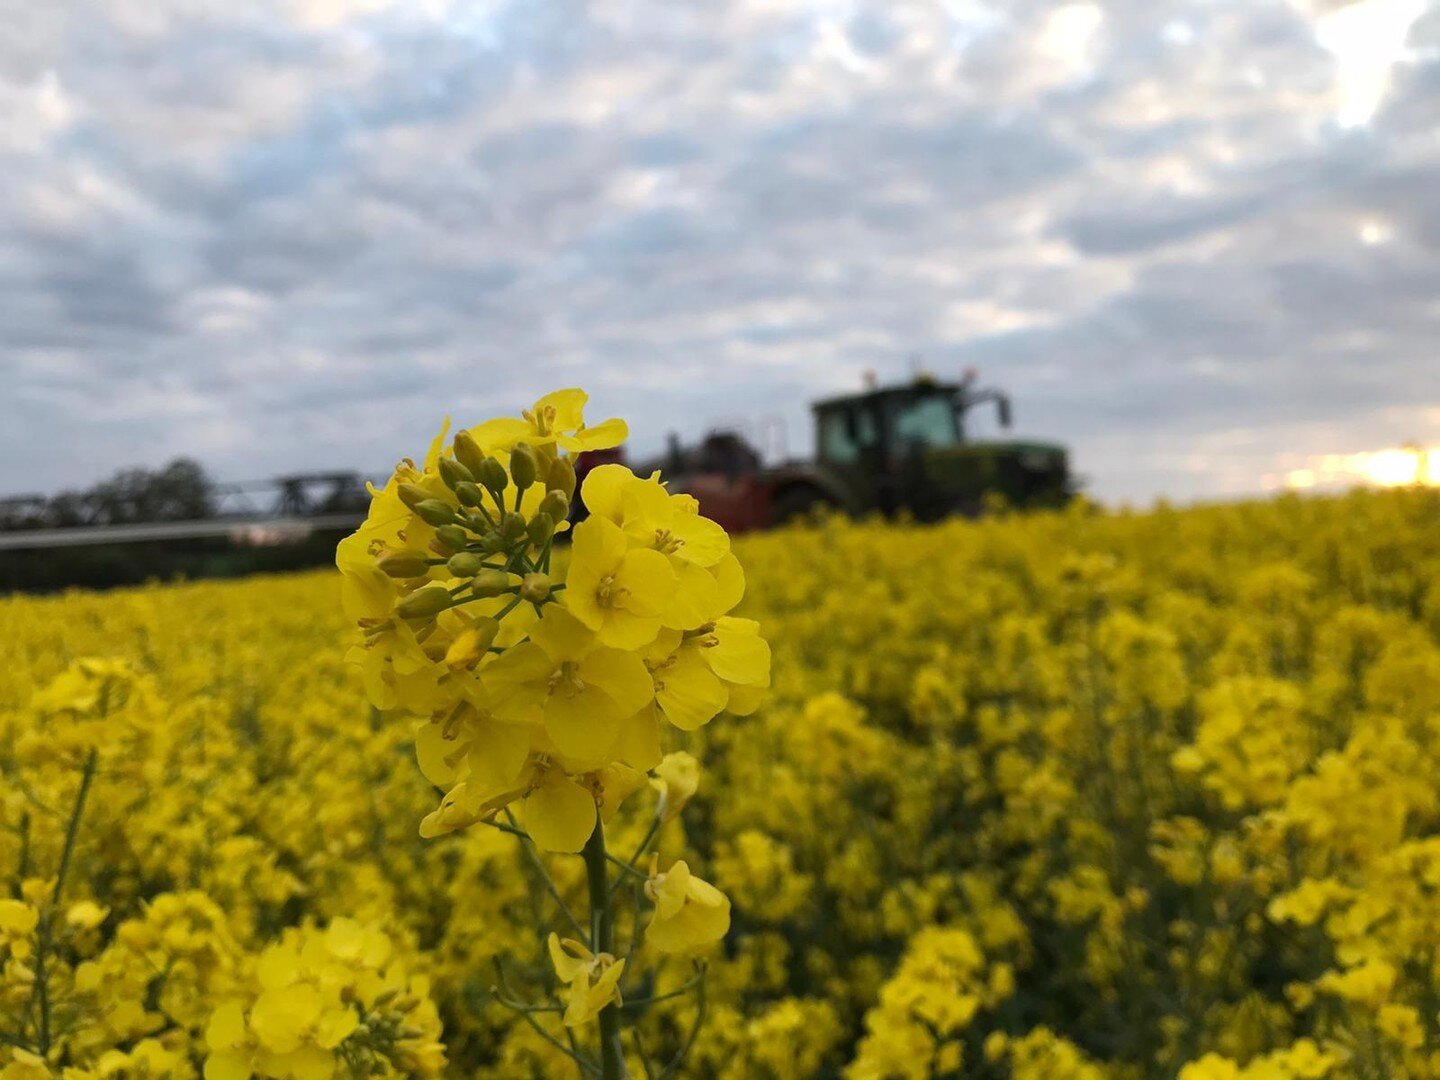 Bit of evening spraying on the oilseed rape. ⁠
⁠
We spray with a mix of fungicide and micronutrients to help prevent disease and promote health growth. ⁠
⁠
Whenever we have to spray a flowering crop, we do it in the evening to reduce the chance of it